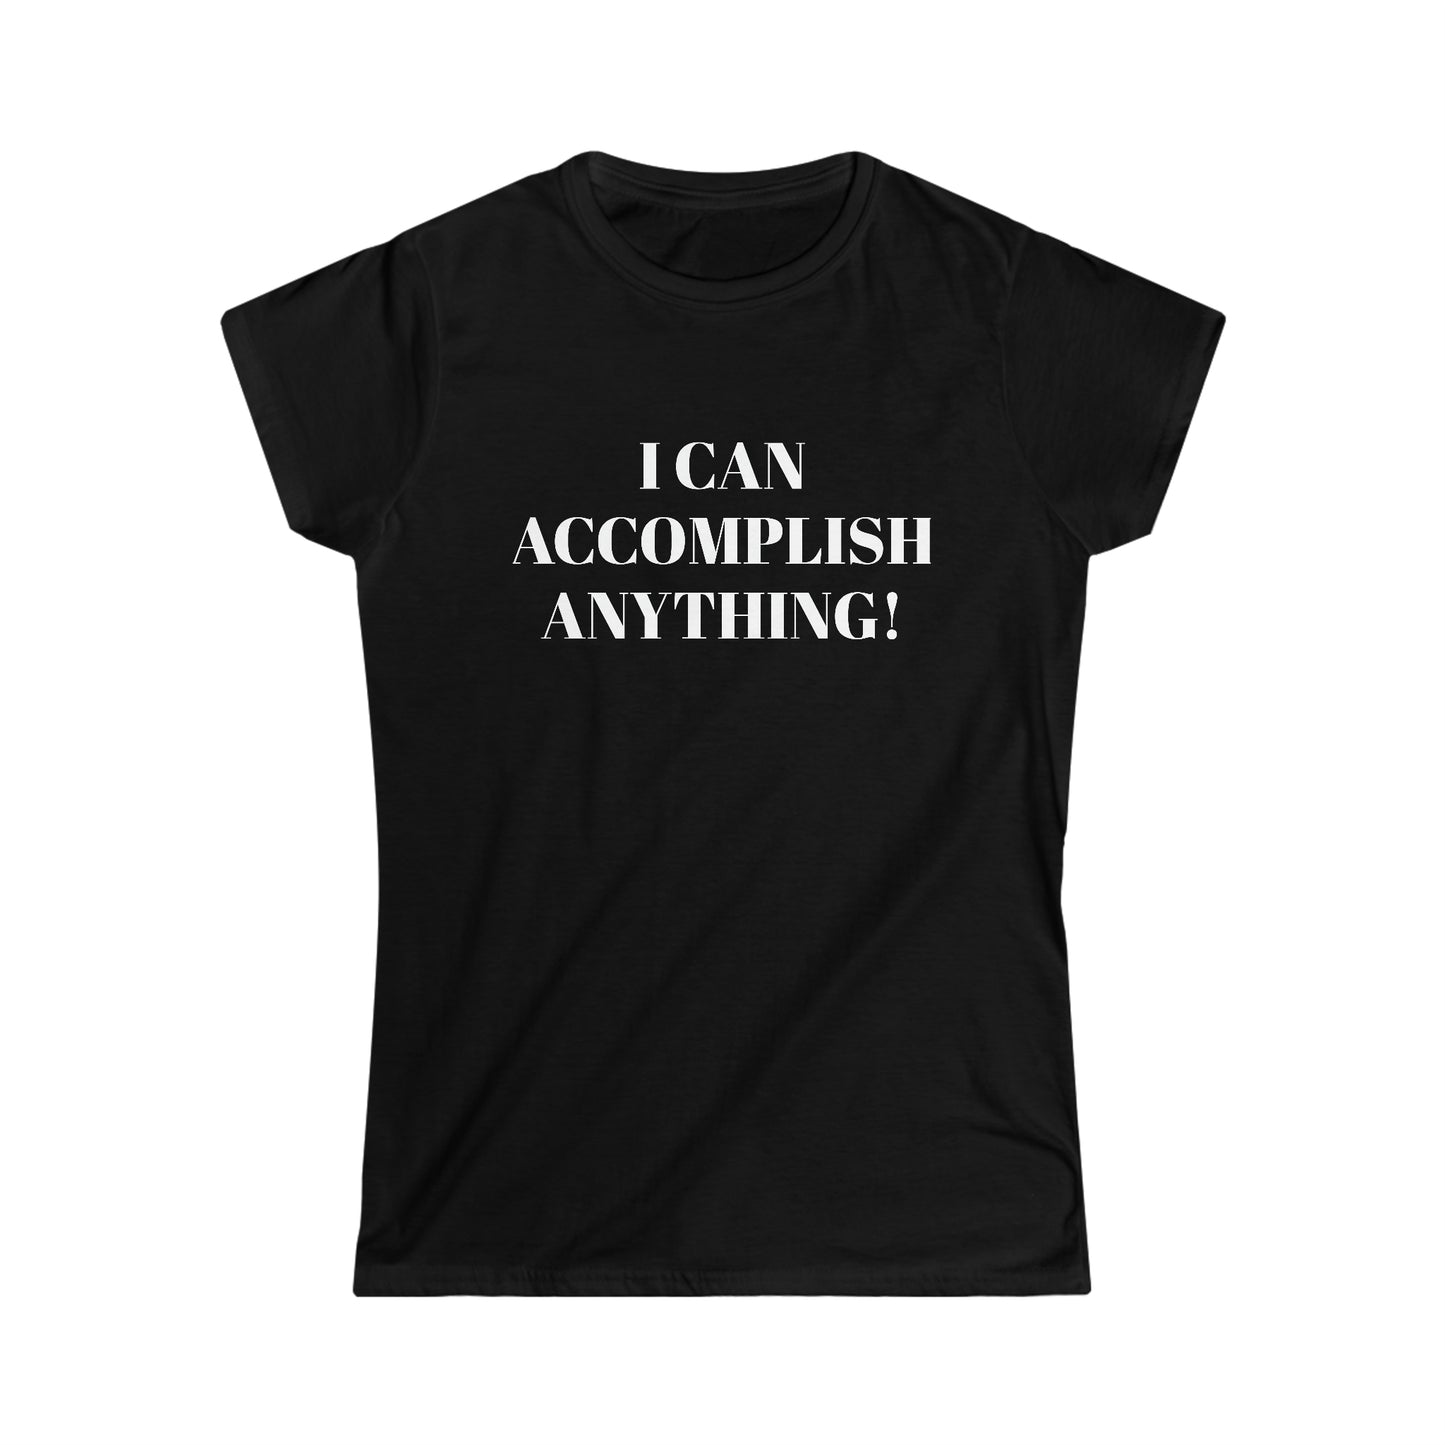 I Can Accomplish ANYTHING-Women's Softstyle Tee